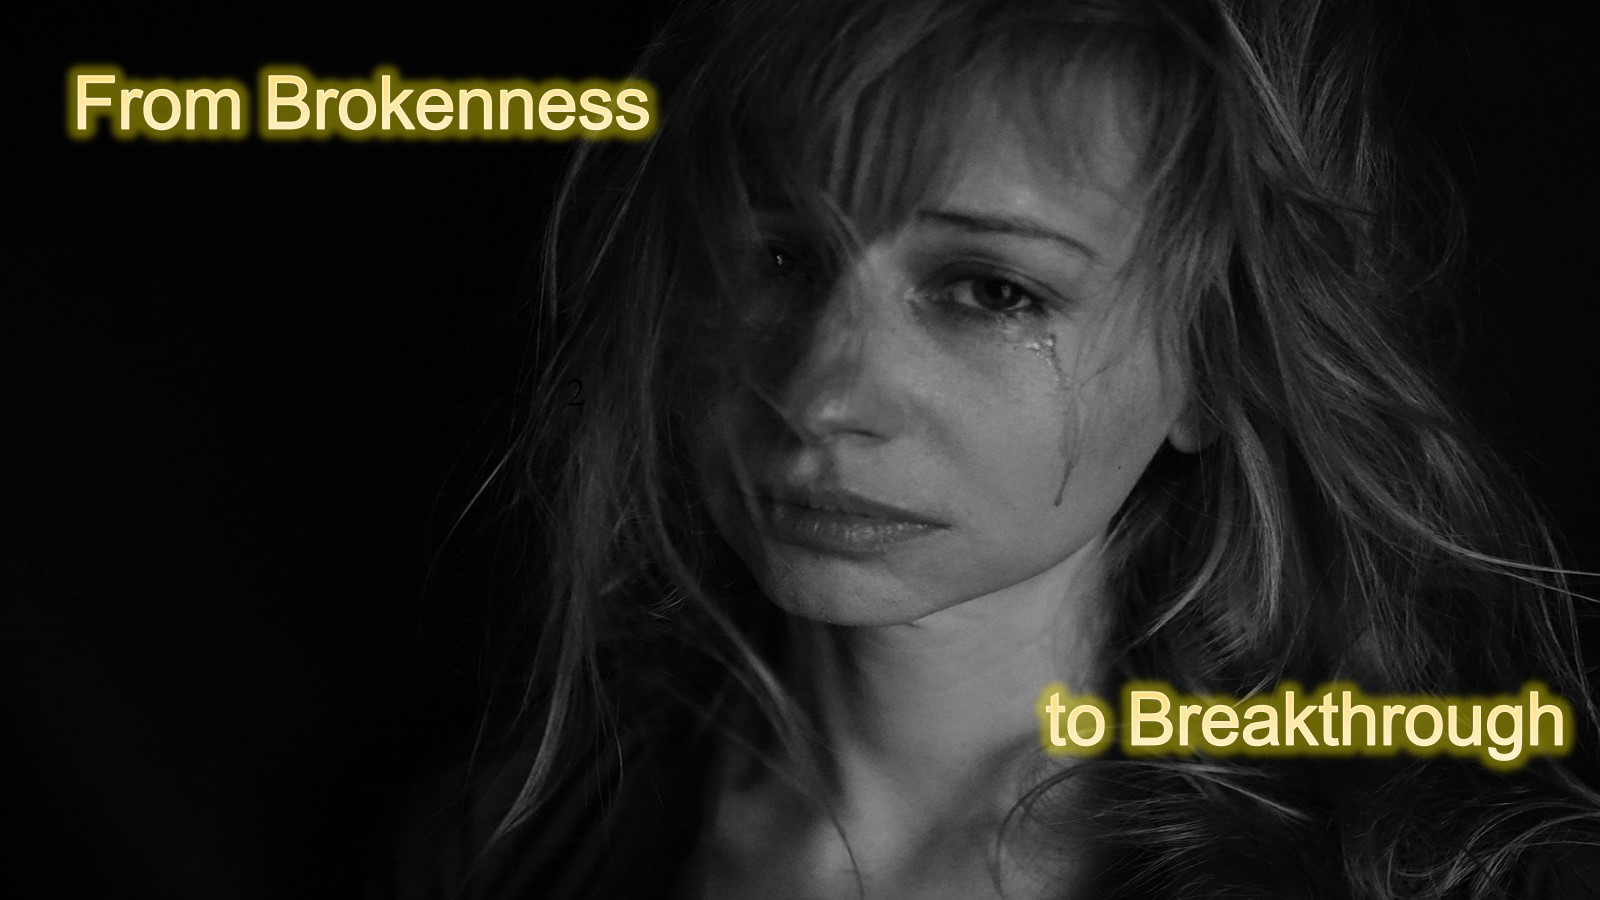 From Brokenness to Breakthrough